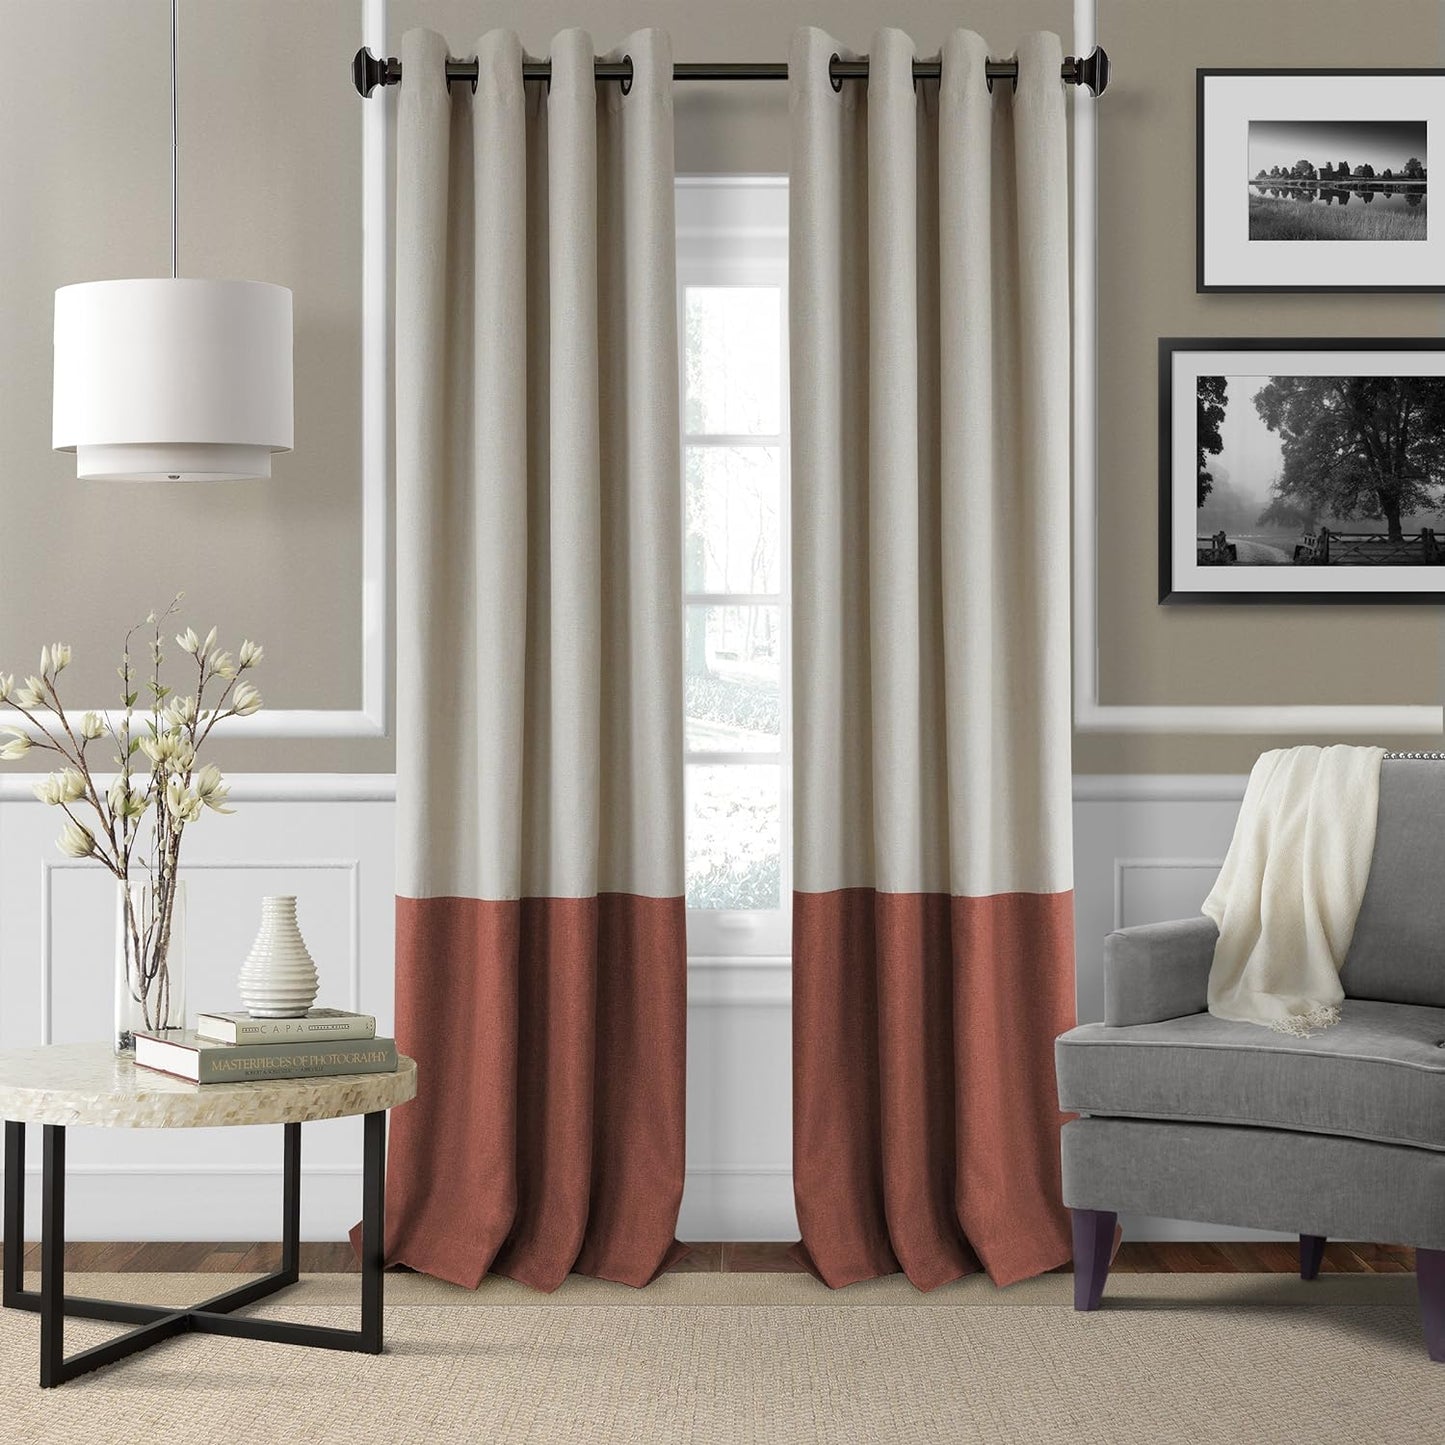 Elrene Home Fashions Braiden Color-Block Blackout Window Curtain, Single Panel, 52 in X 84 in (1 Panel), Navy  Elrene Home Fashions Rust 52" X 95" (1 Panel) 